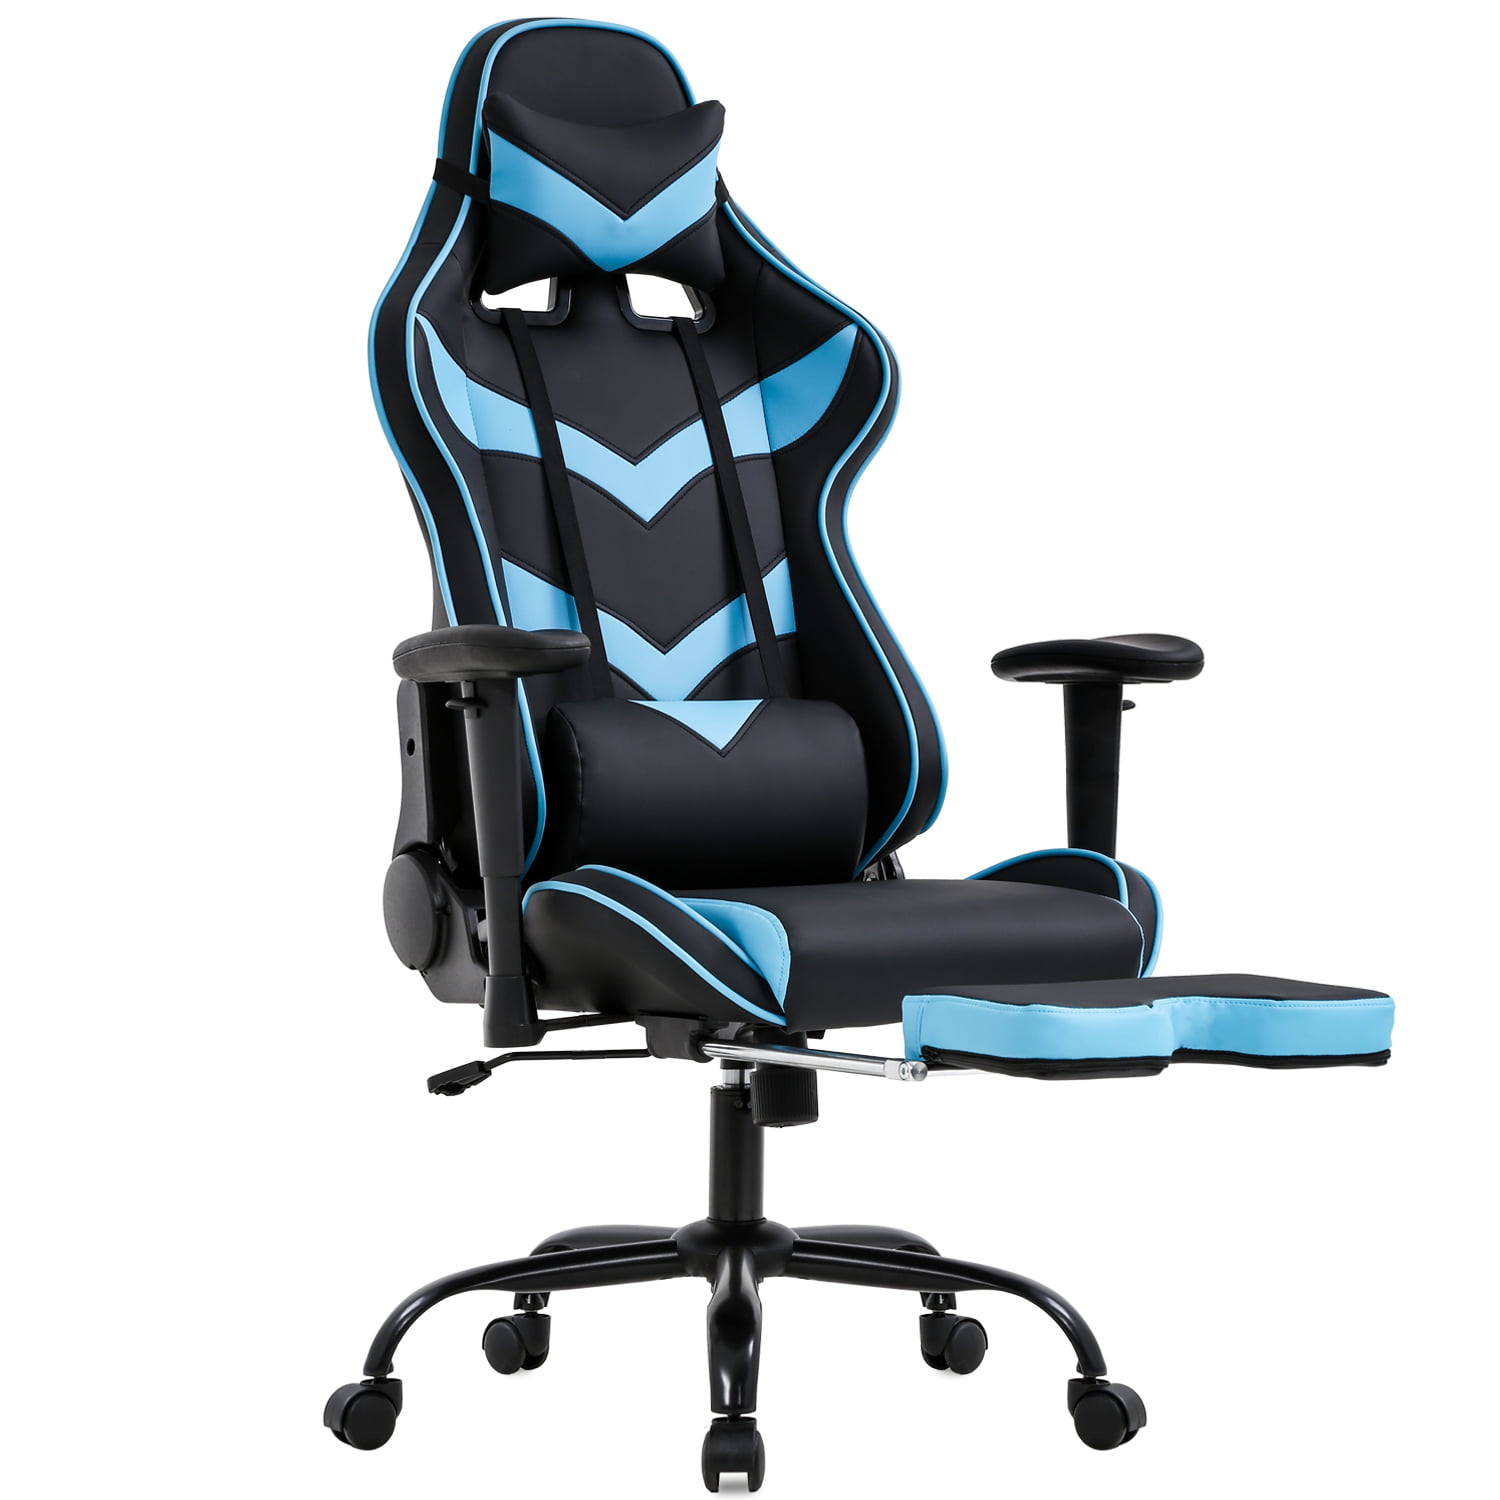 Details about   Ergonomic Office Gaming Chair Racing Computer PU Swivel Massage Footrest Blue 